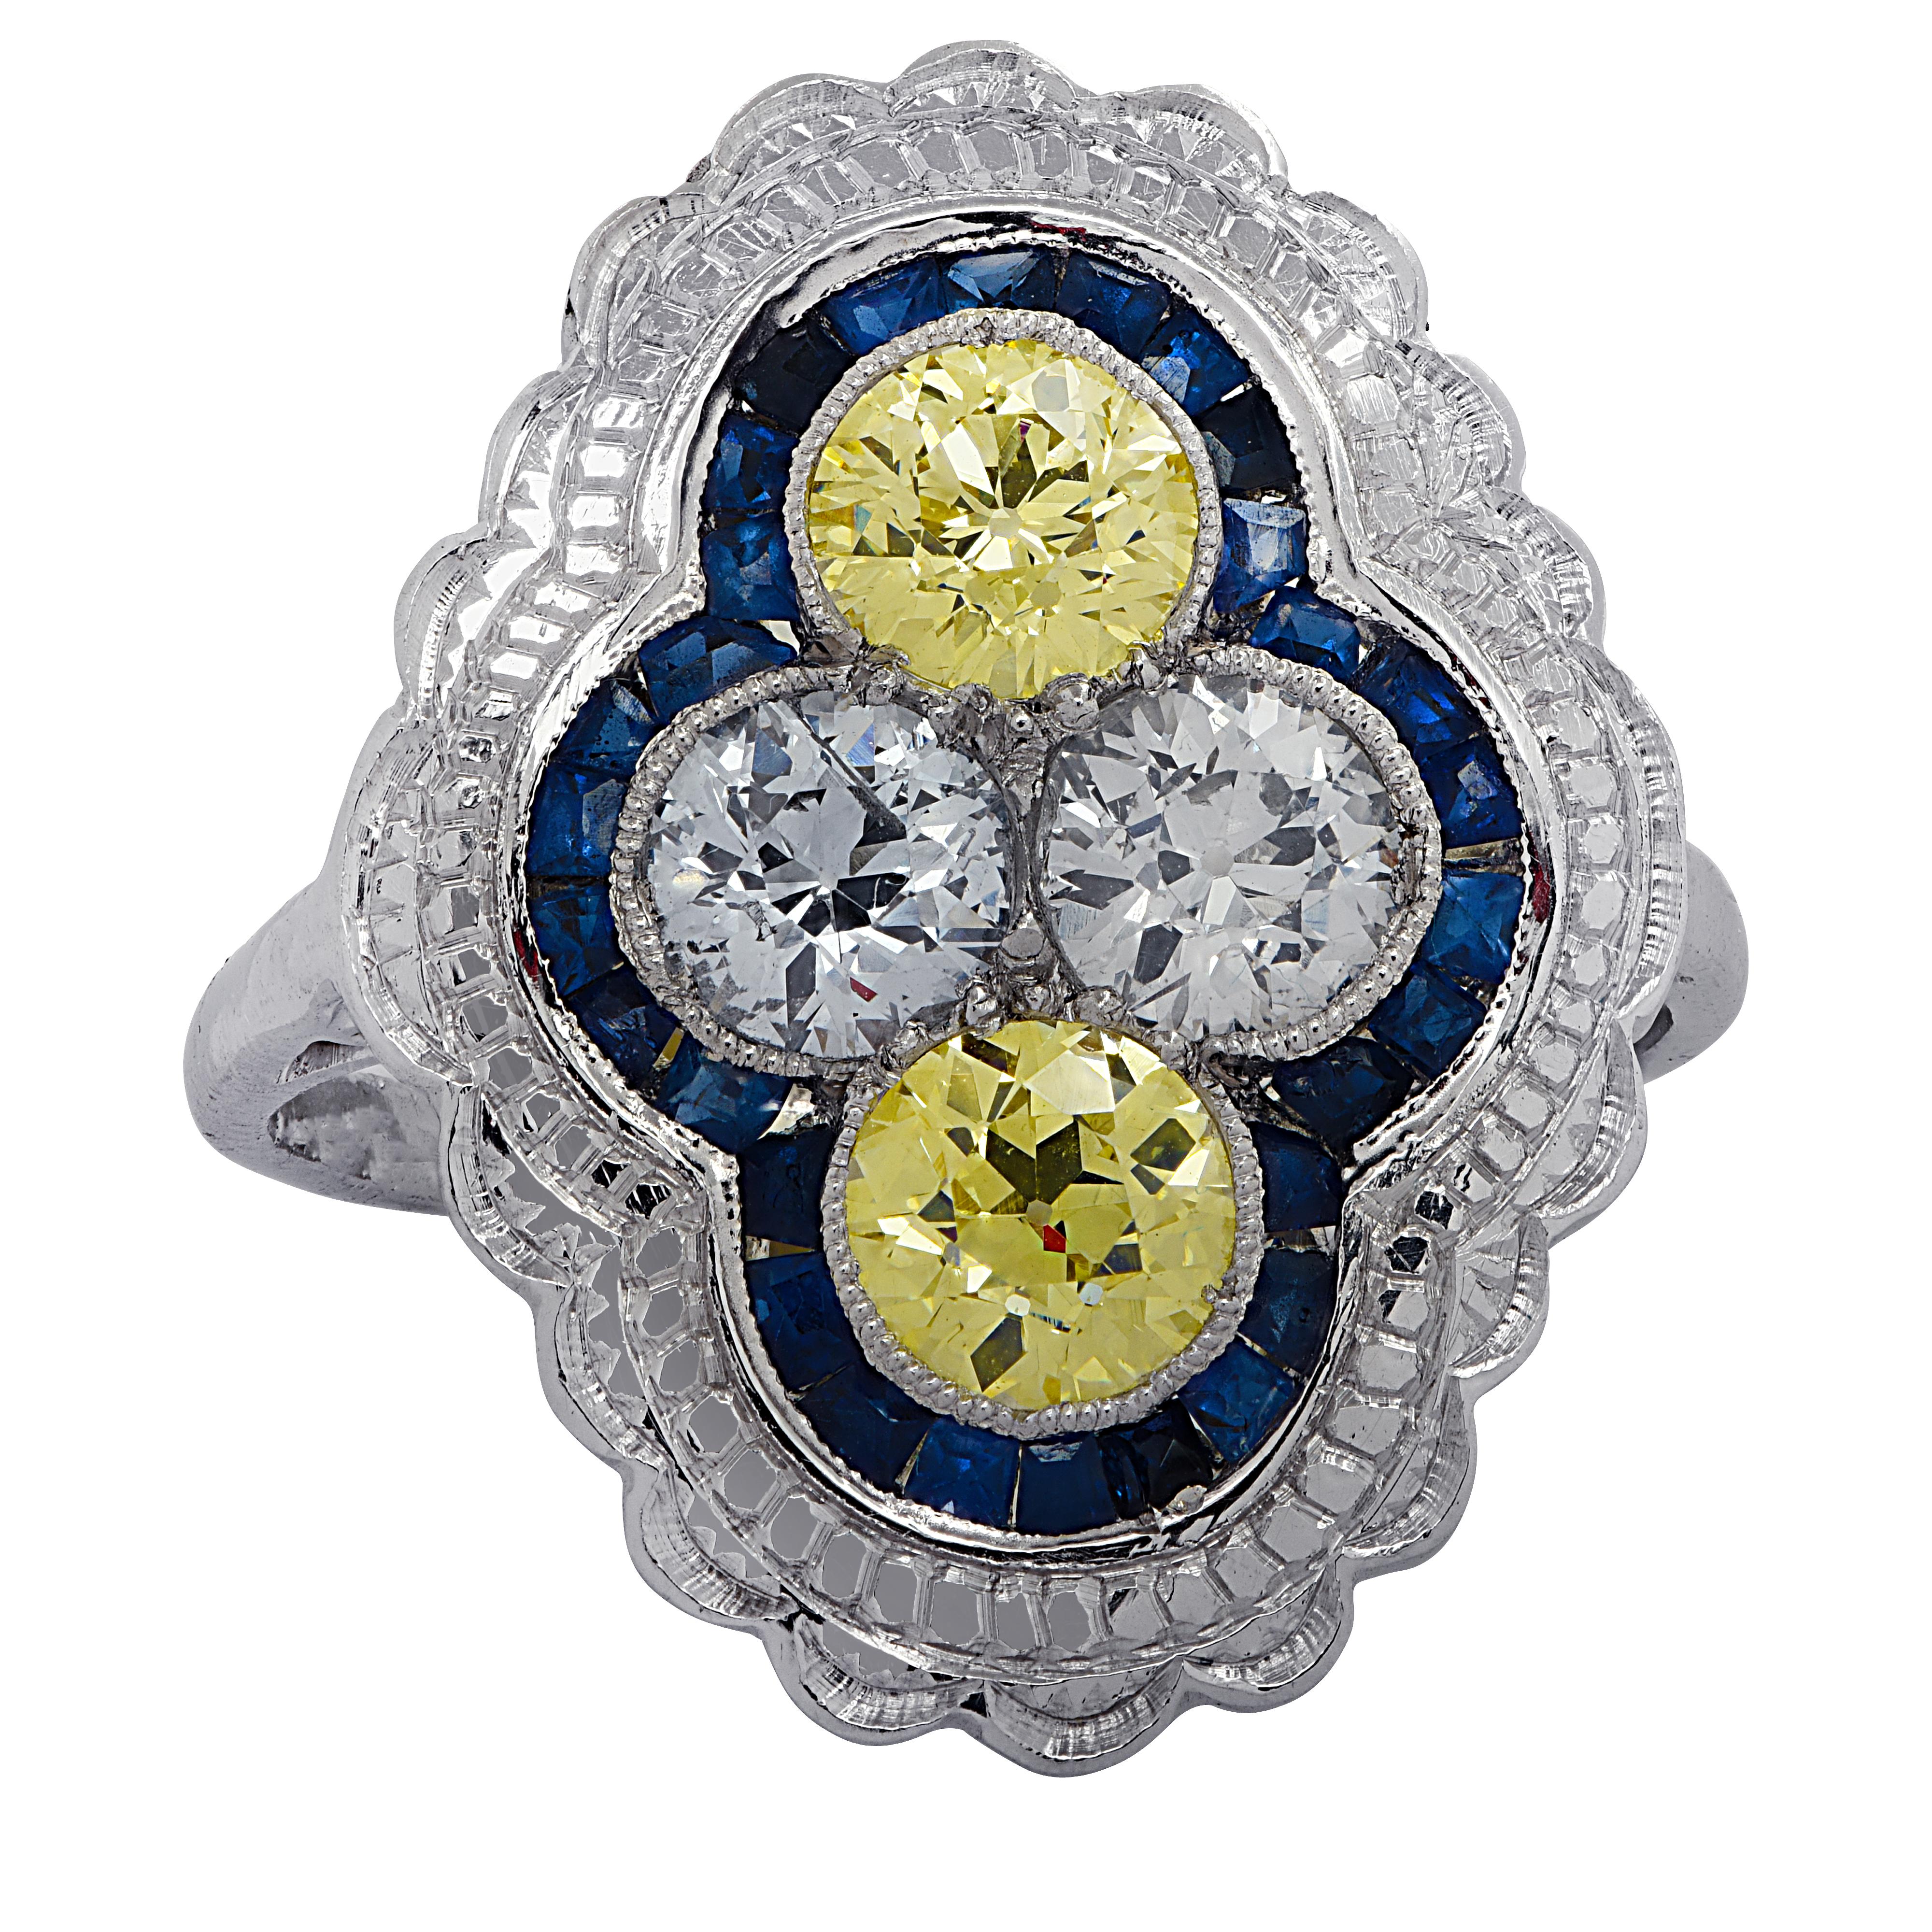 Beautiful Art Deco Style ring crafted in platinum, featuring 2 Old European Cut diamonds weighing approximately  .80 carats total, G-H color, VS-SI clarity and 2 Old European Cut Fancy Yellow Diamonds weighing approximately 1 carat total, VS-SI